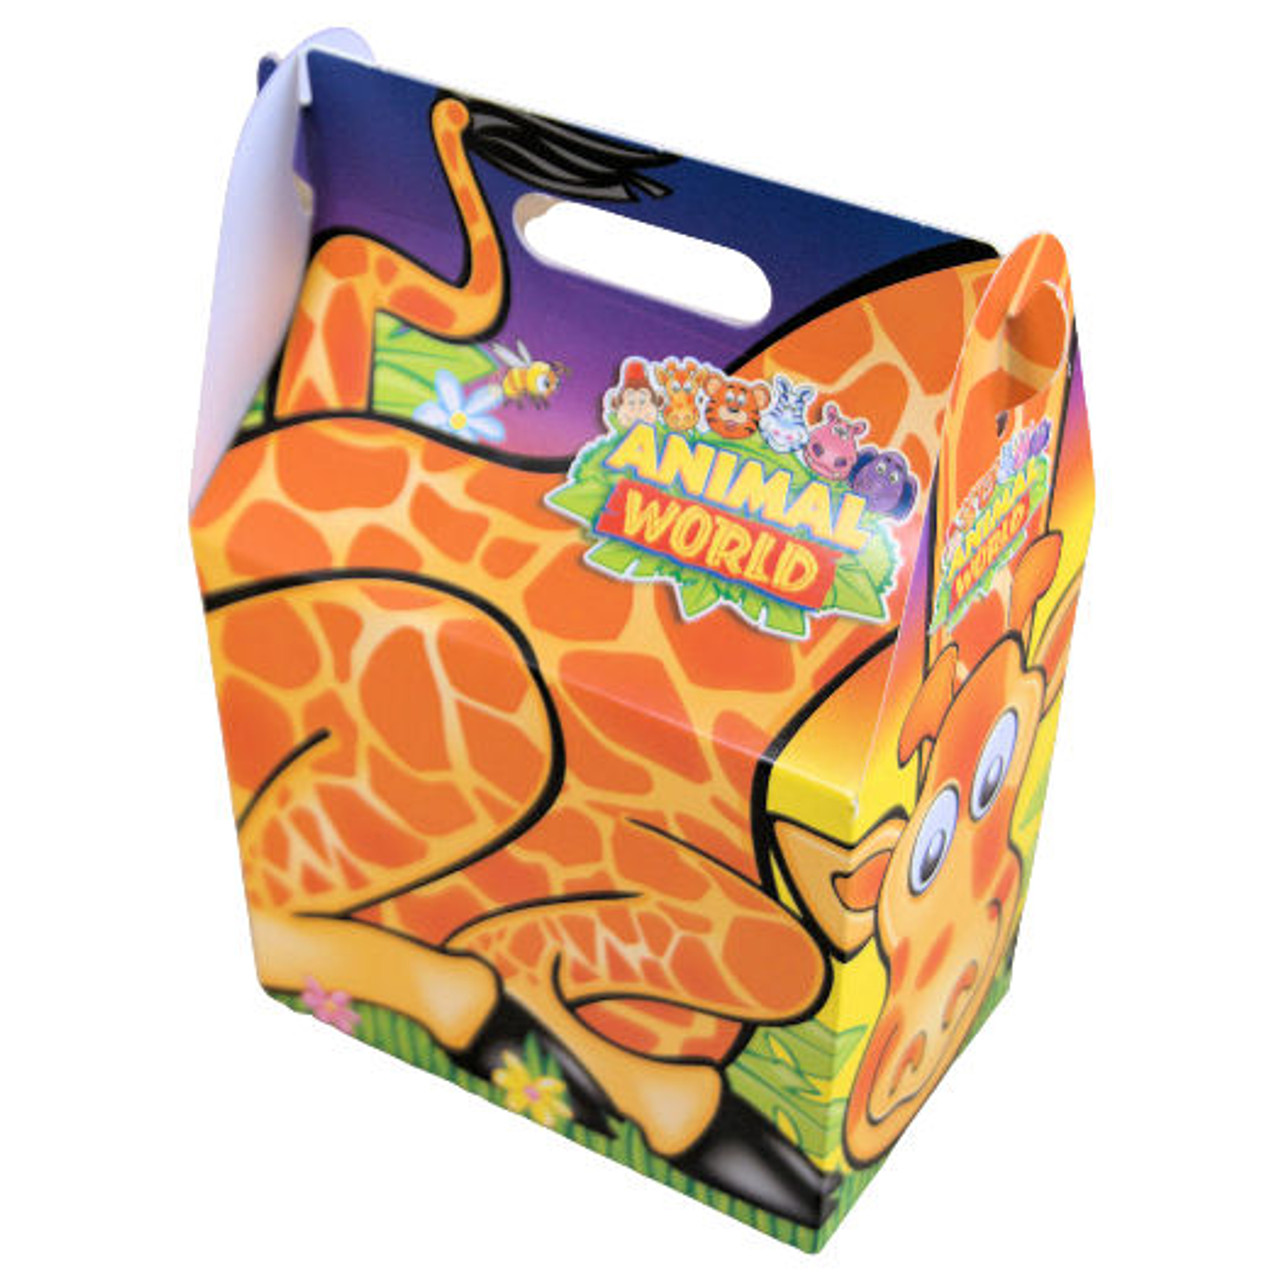 Childrens meal boxes, childrens Party box kits, childrens activity meal  boxes